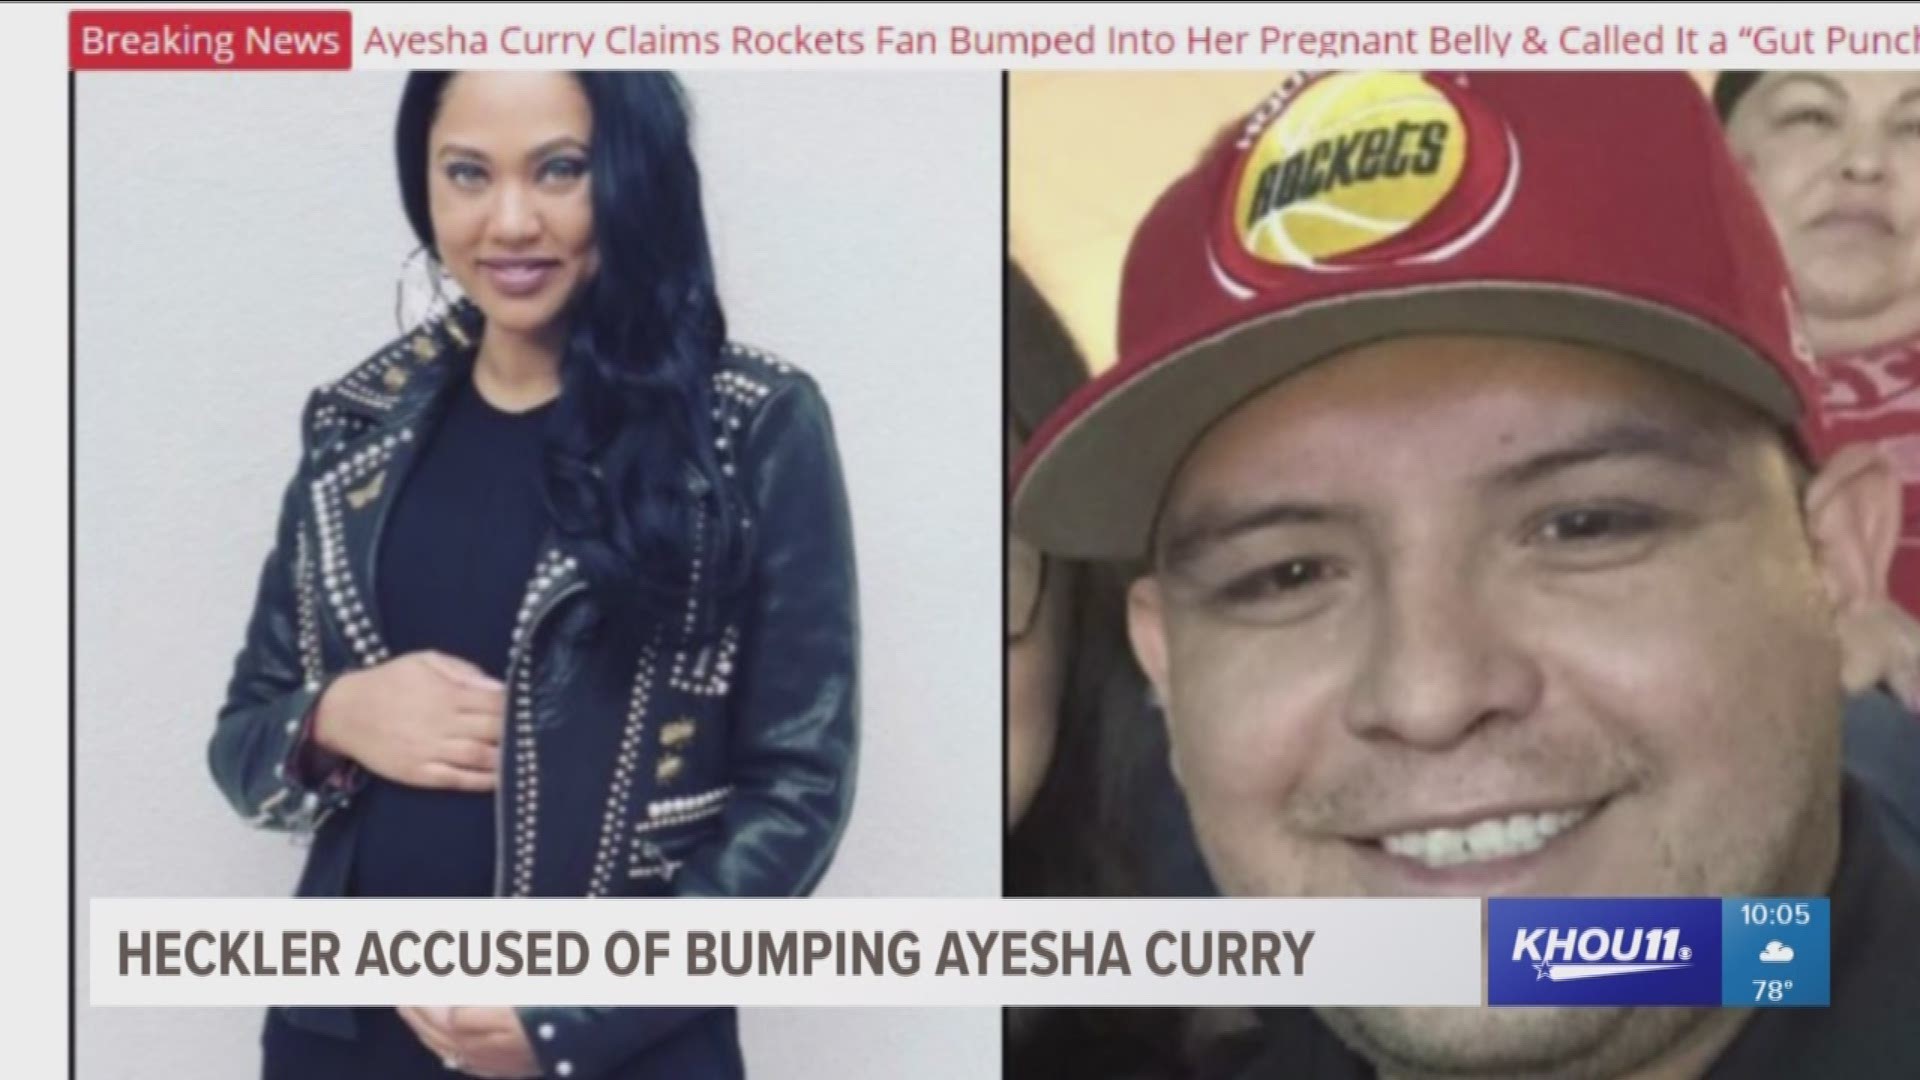 Heckler accused of bumping Ayesha Curry